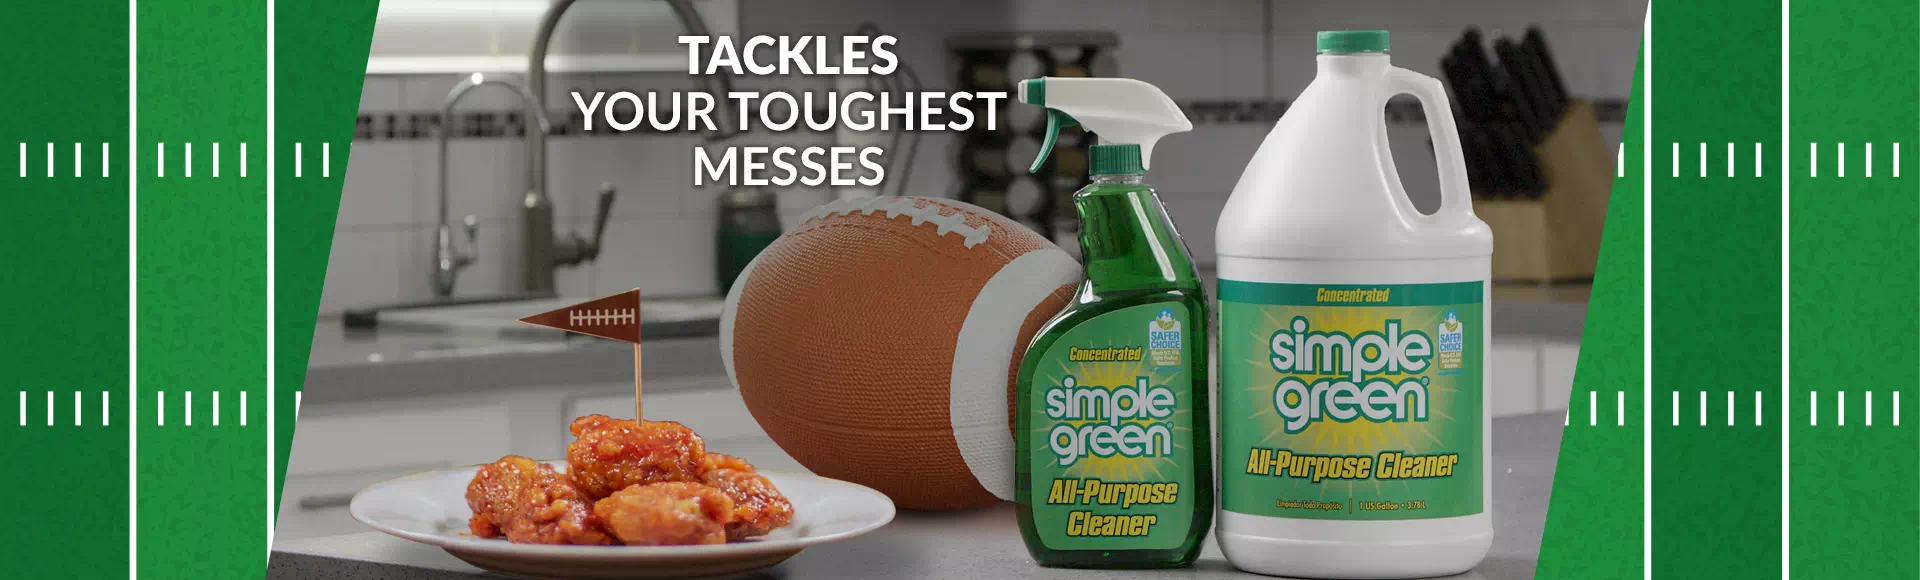 Simple Green Tackles Your Toughest Messes